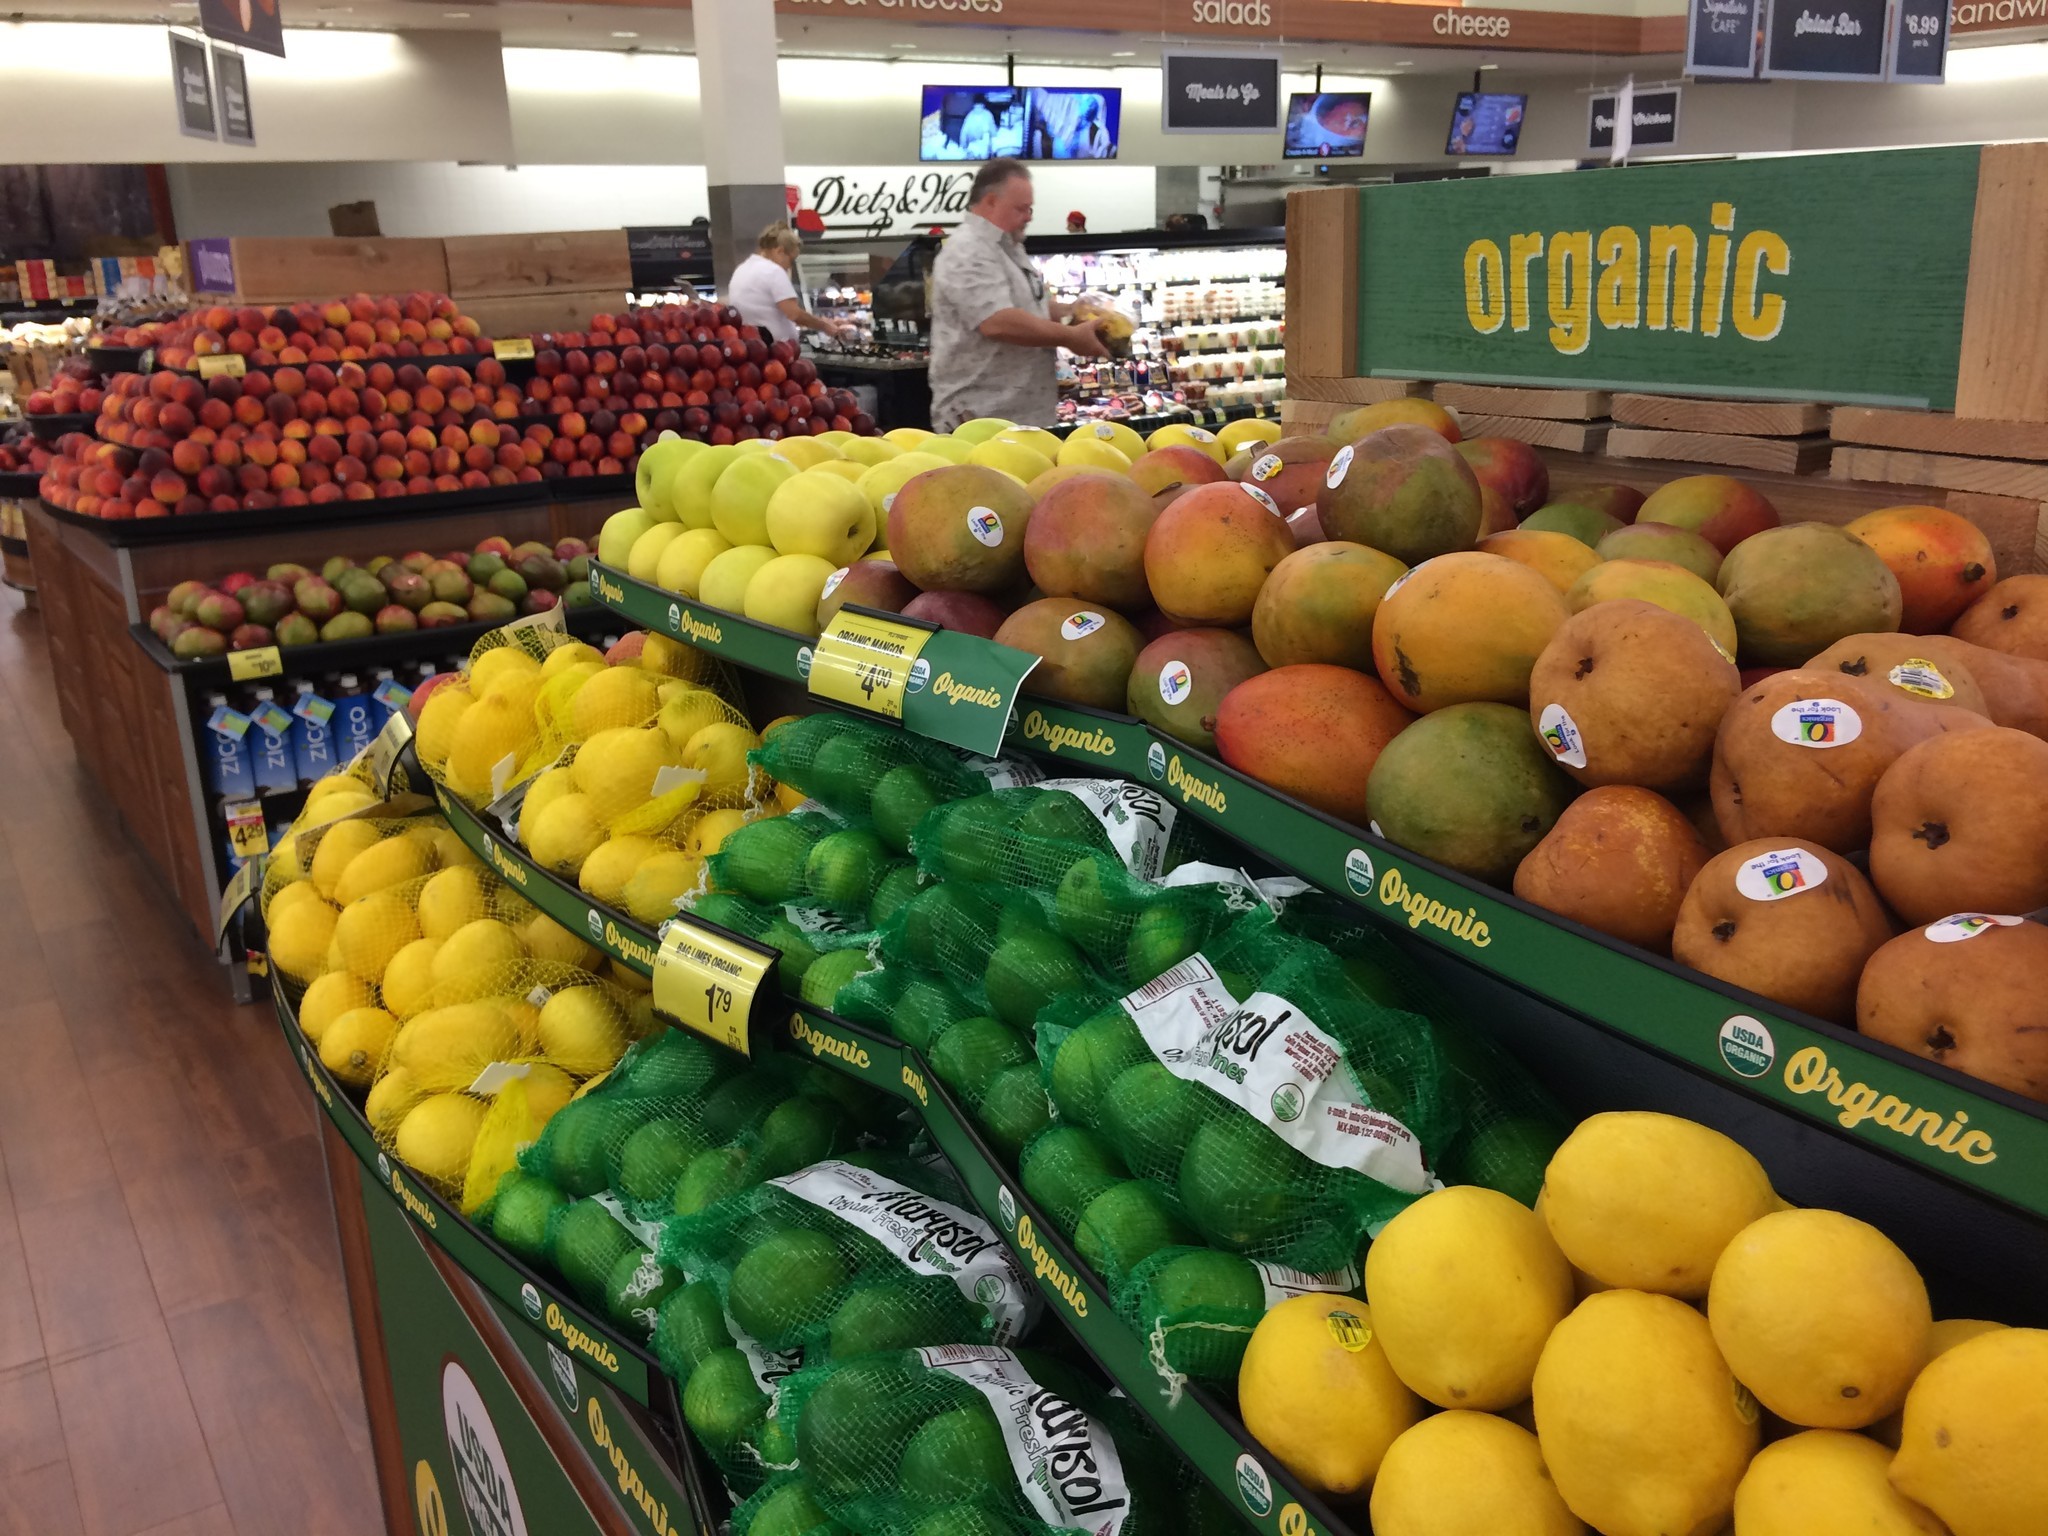 Safeway grocery chain debuts in Altamonte Springs at remodeled Albertsons - Orlando Sentinel